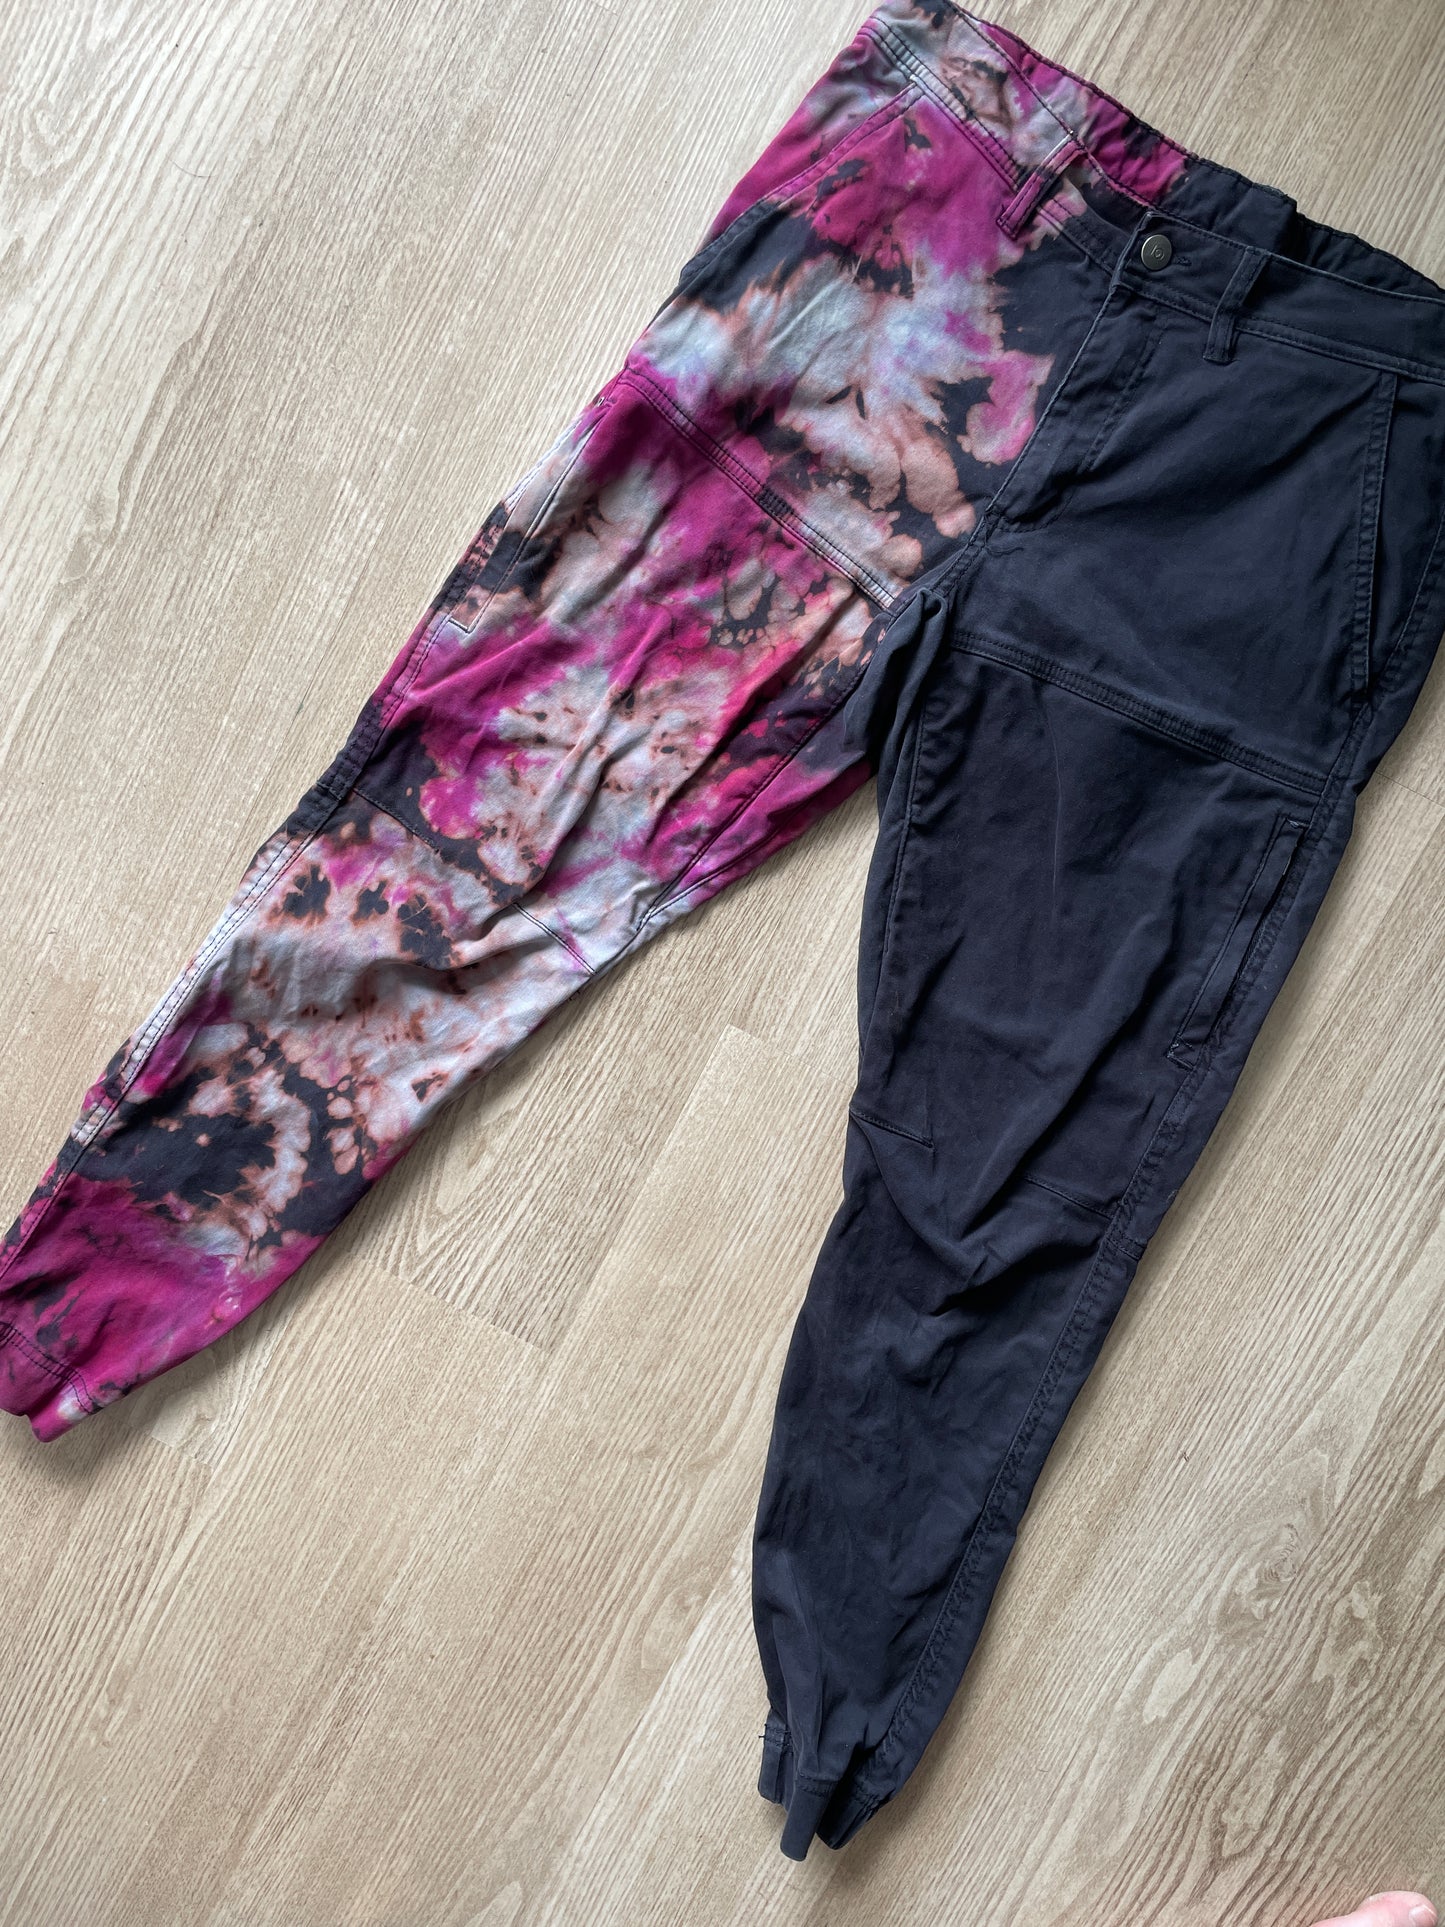 Men’s Size 30 tentree In Motion Tie Dye Jogger Pants | One-Of-a-Kind Upcycled Black and Pink Crumpled Climbing Pants